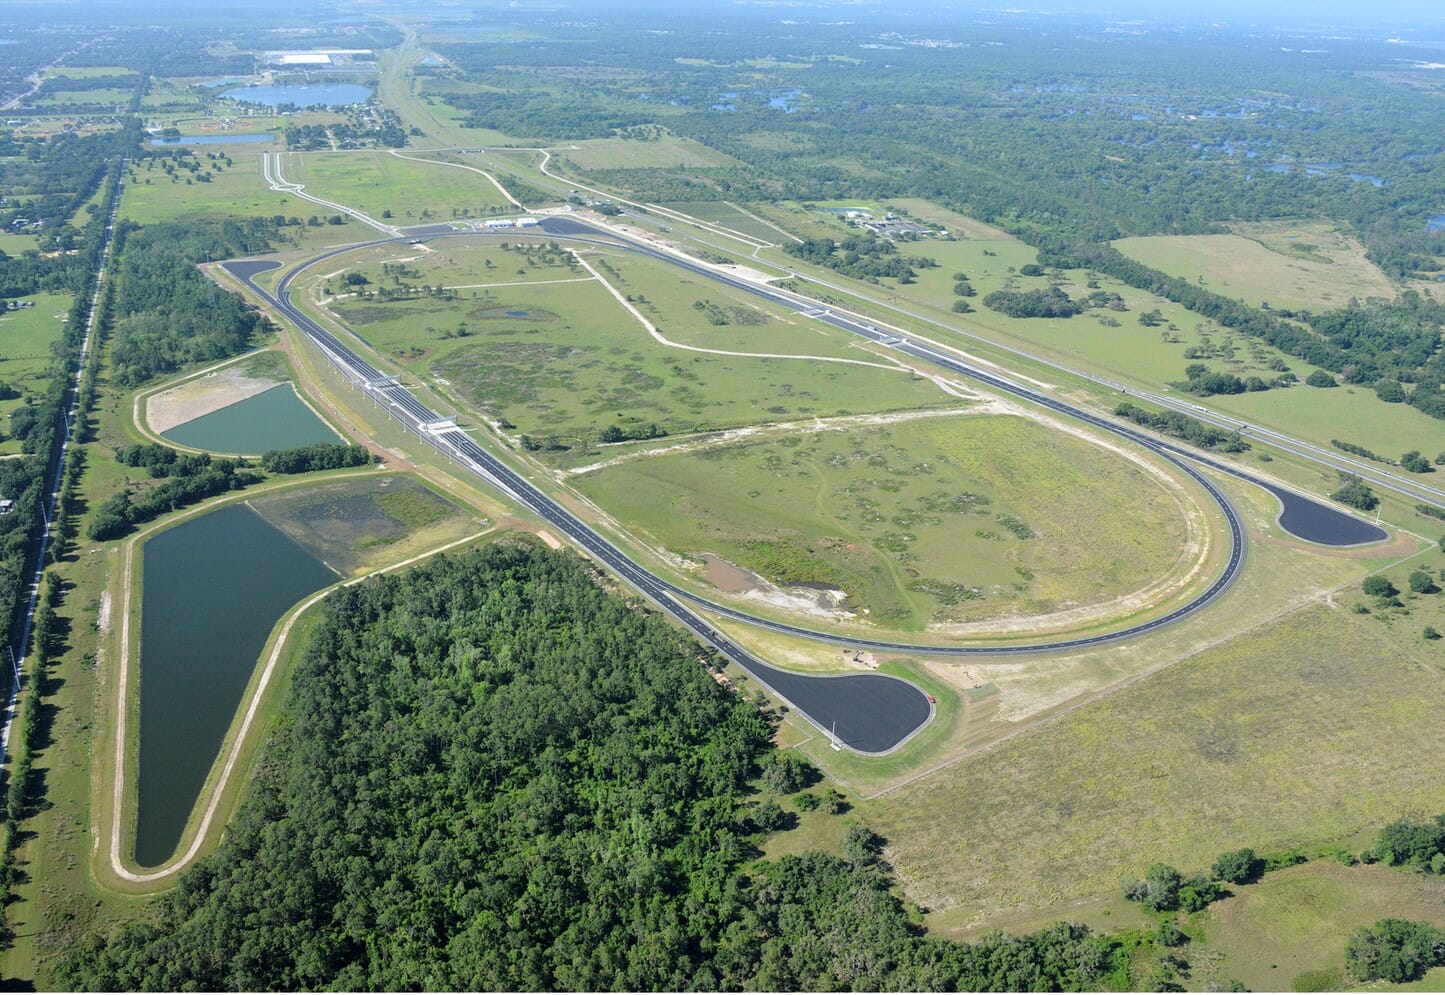 An aerial view of a race track in florida.